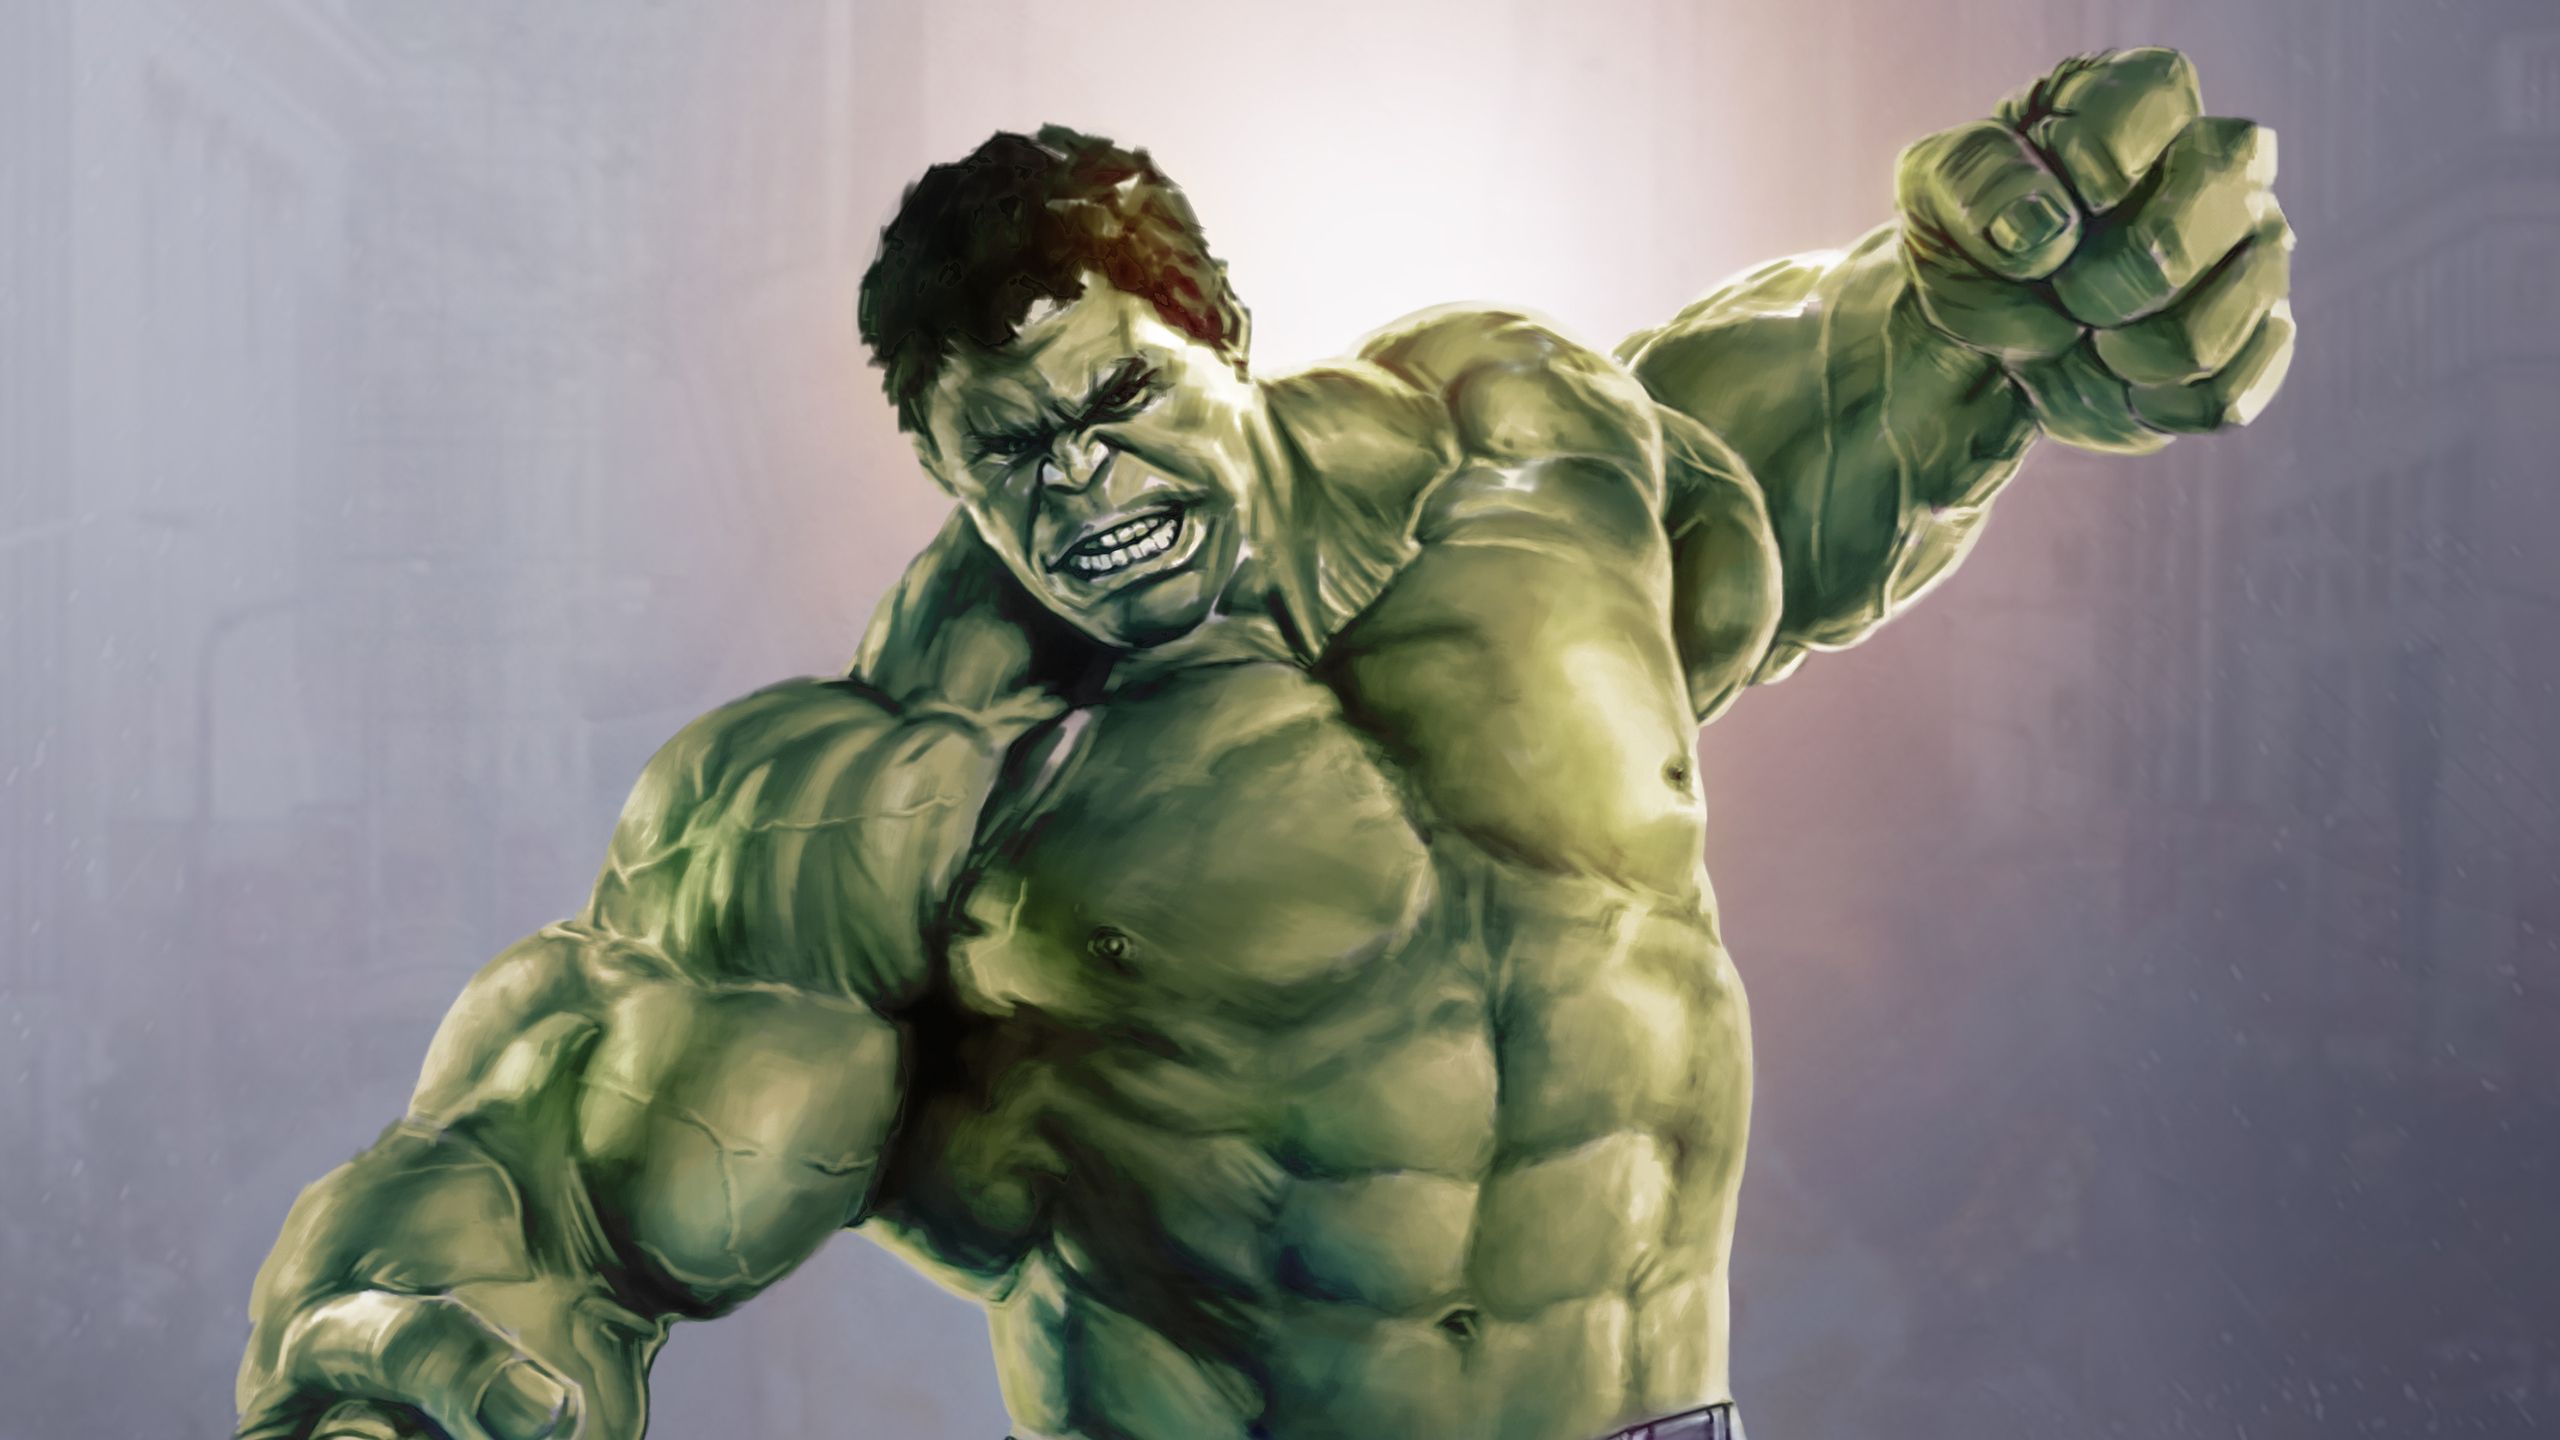 Incredible Hulk Avengers 1440P Resolution HD 4k Wallpaper, Image, Background, Photo and Picture